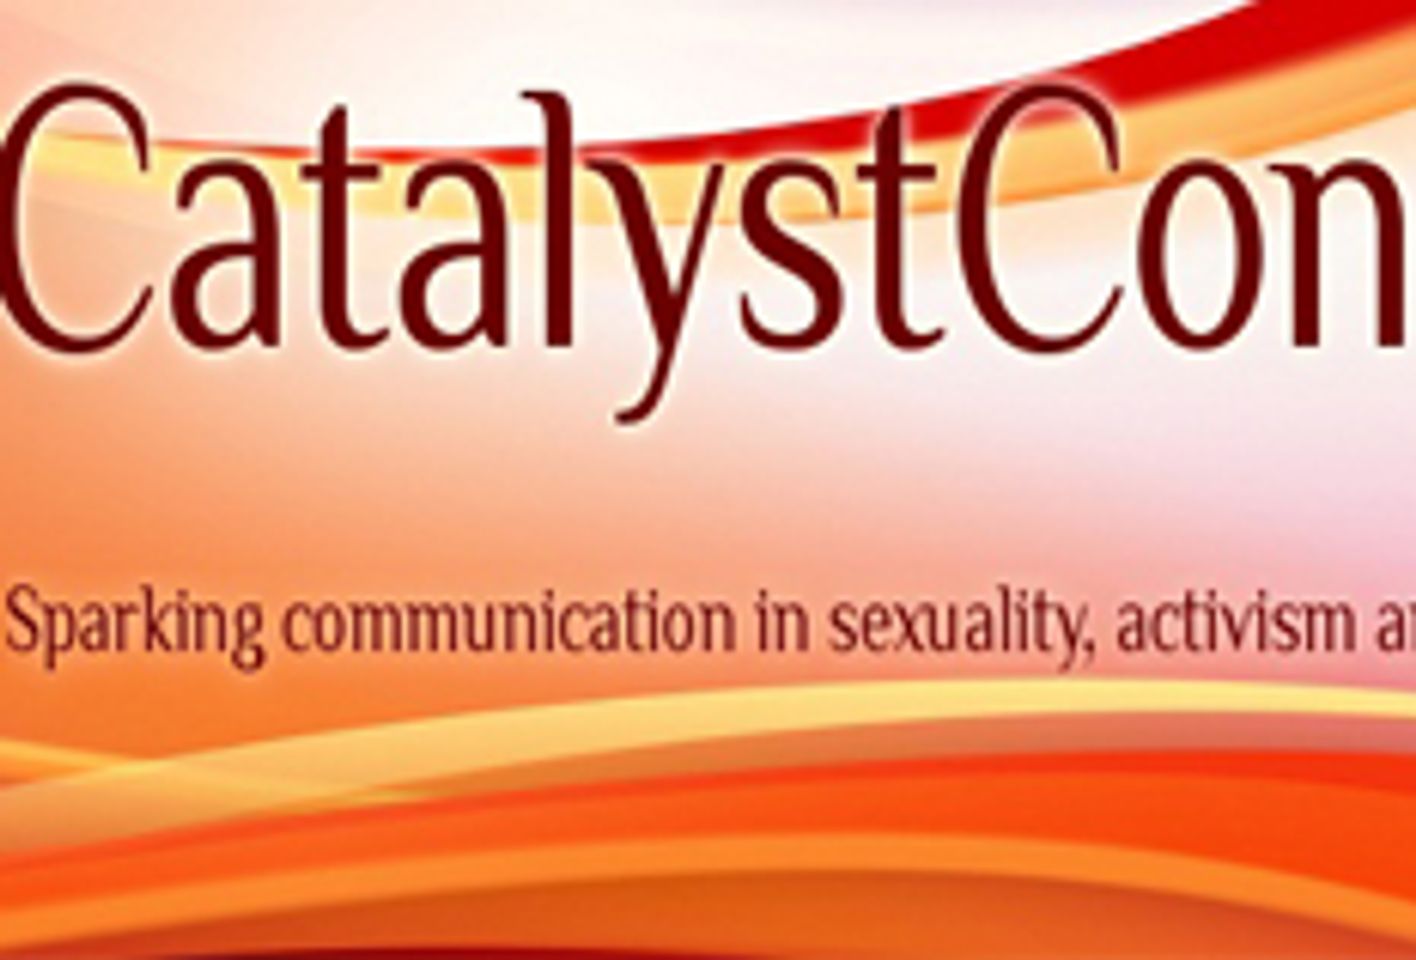 CatalystCon East Sexuality Conference Another Success